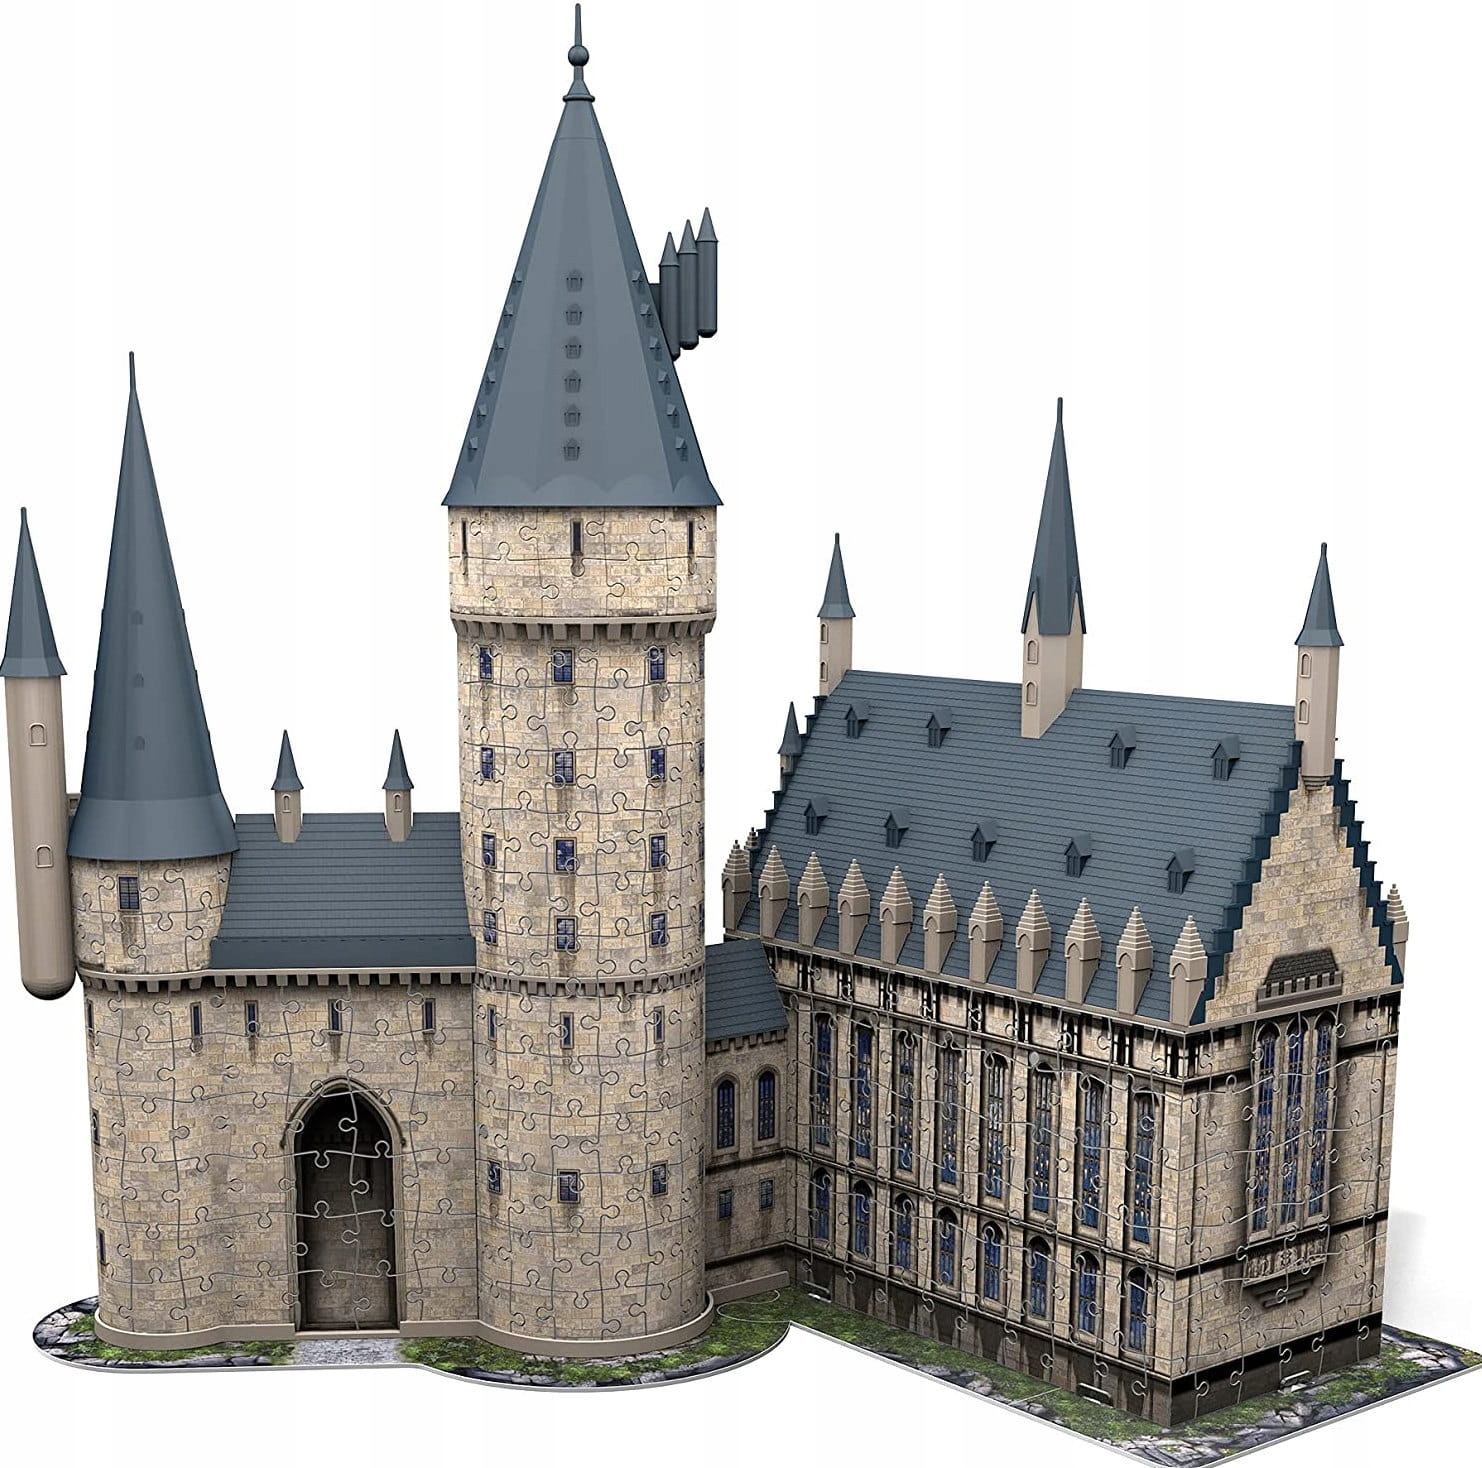 Jigsaw Puzzle Harry Potter Night Hogwarts Castle 1000 Pieces (51x73.5cm) -  Discovery Japan Mall